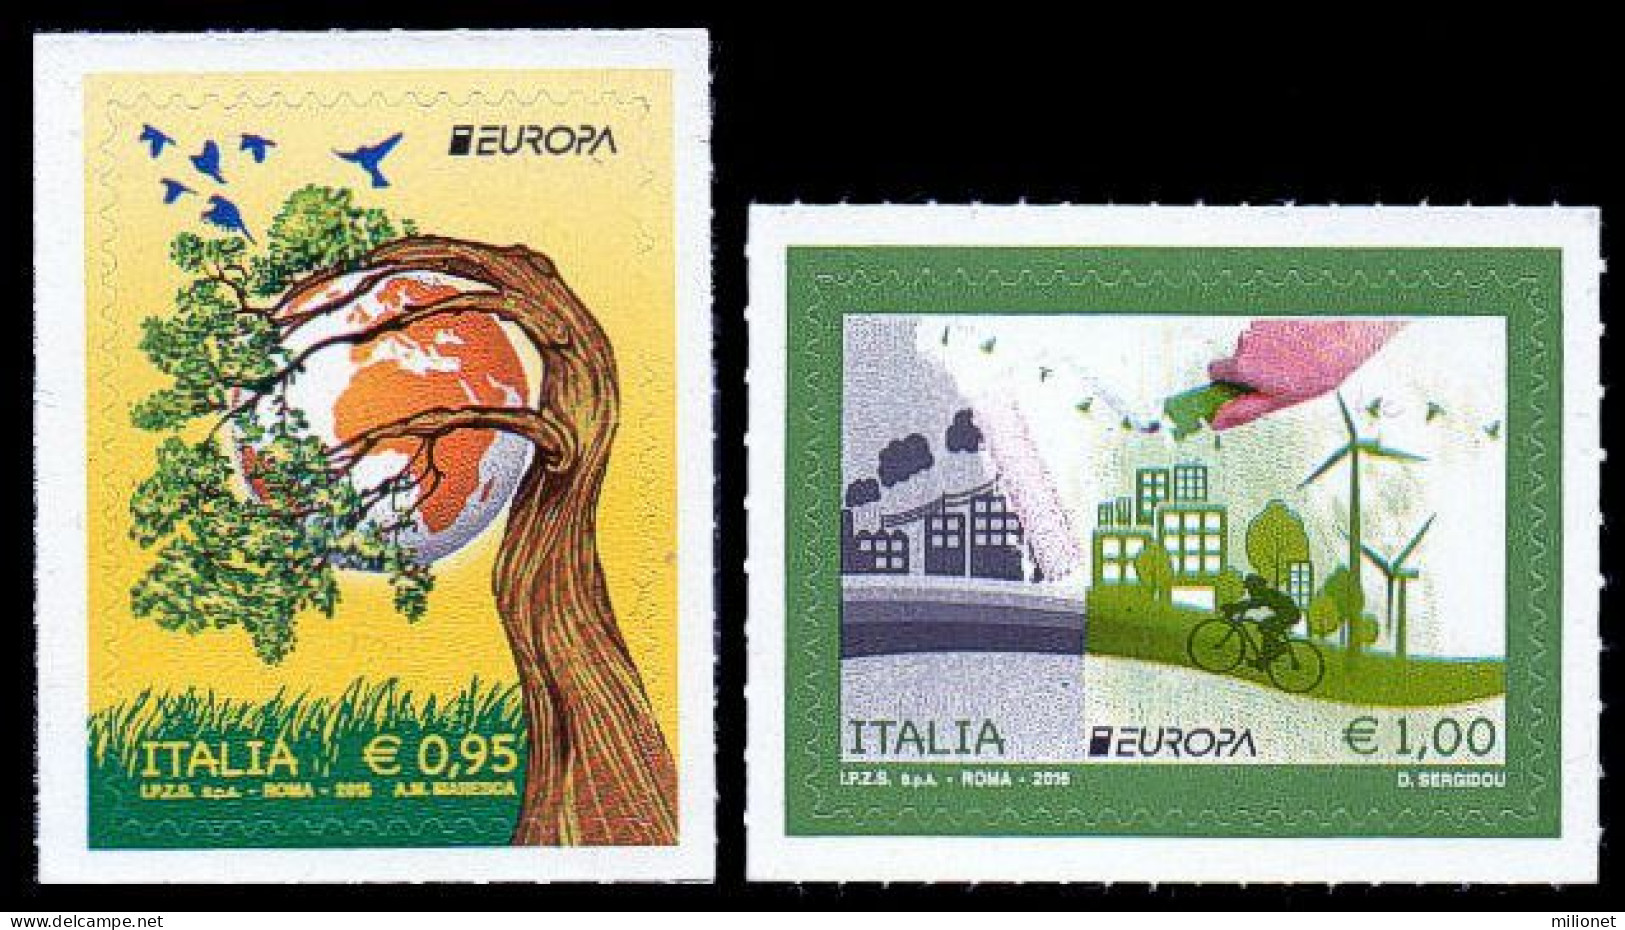 SALE!!! Italy Italia Italie Italien 2016 EUROPA Think Green 2 Stamps MNH ** - 2016